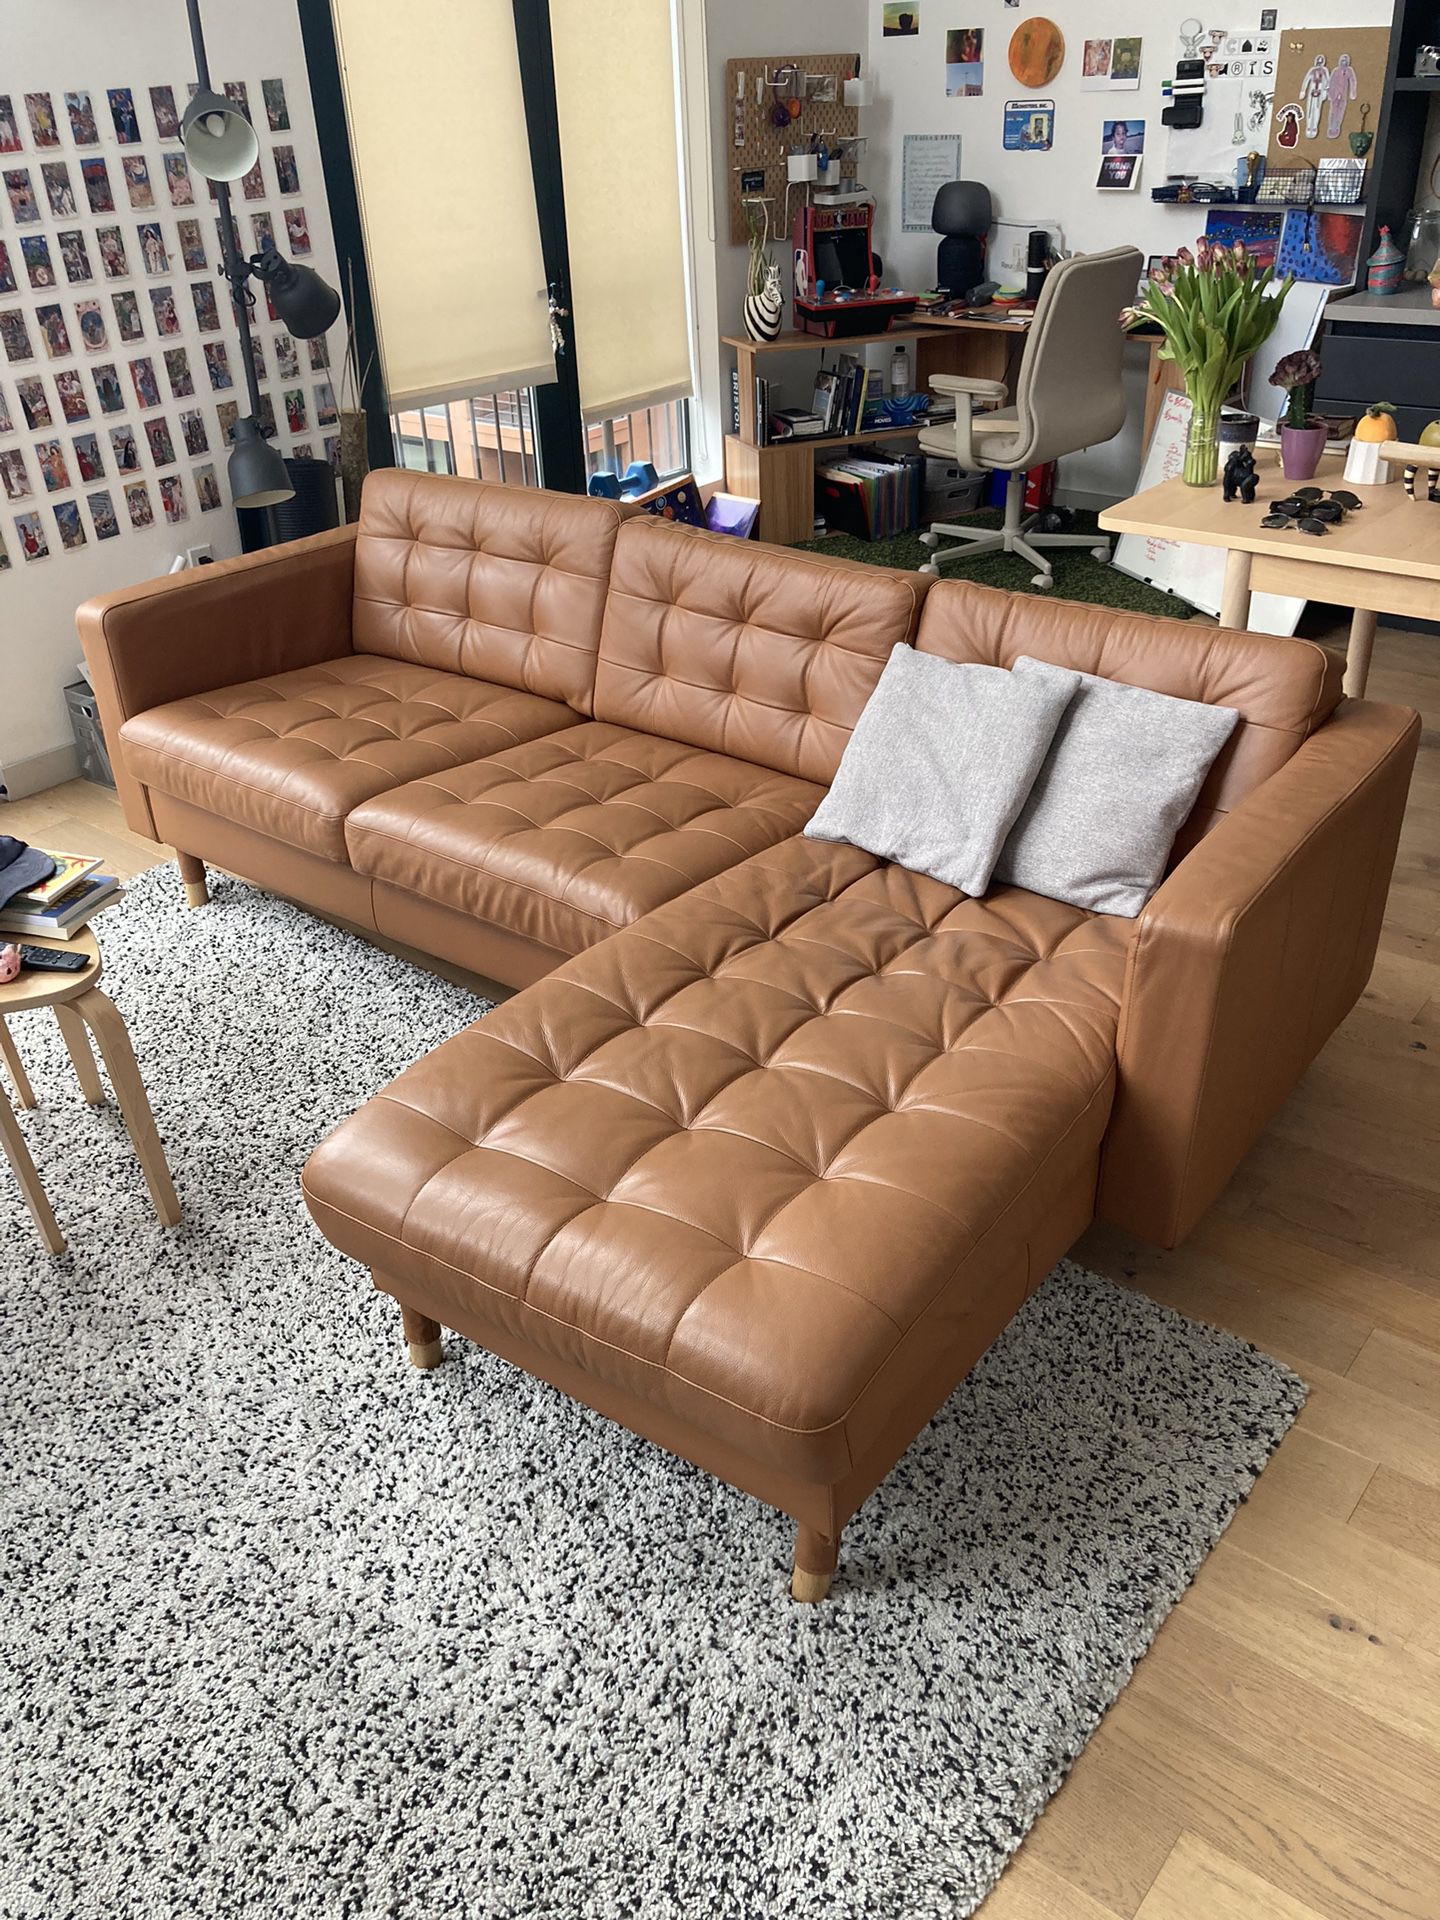 MORABO Sofa - 60's Style FREE DELIVERY